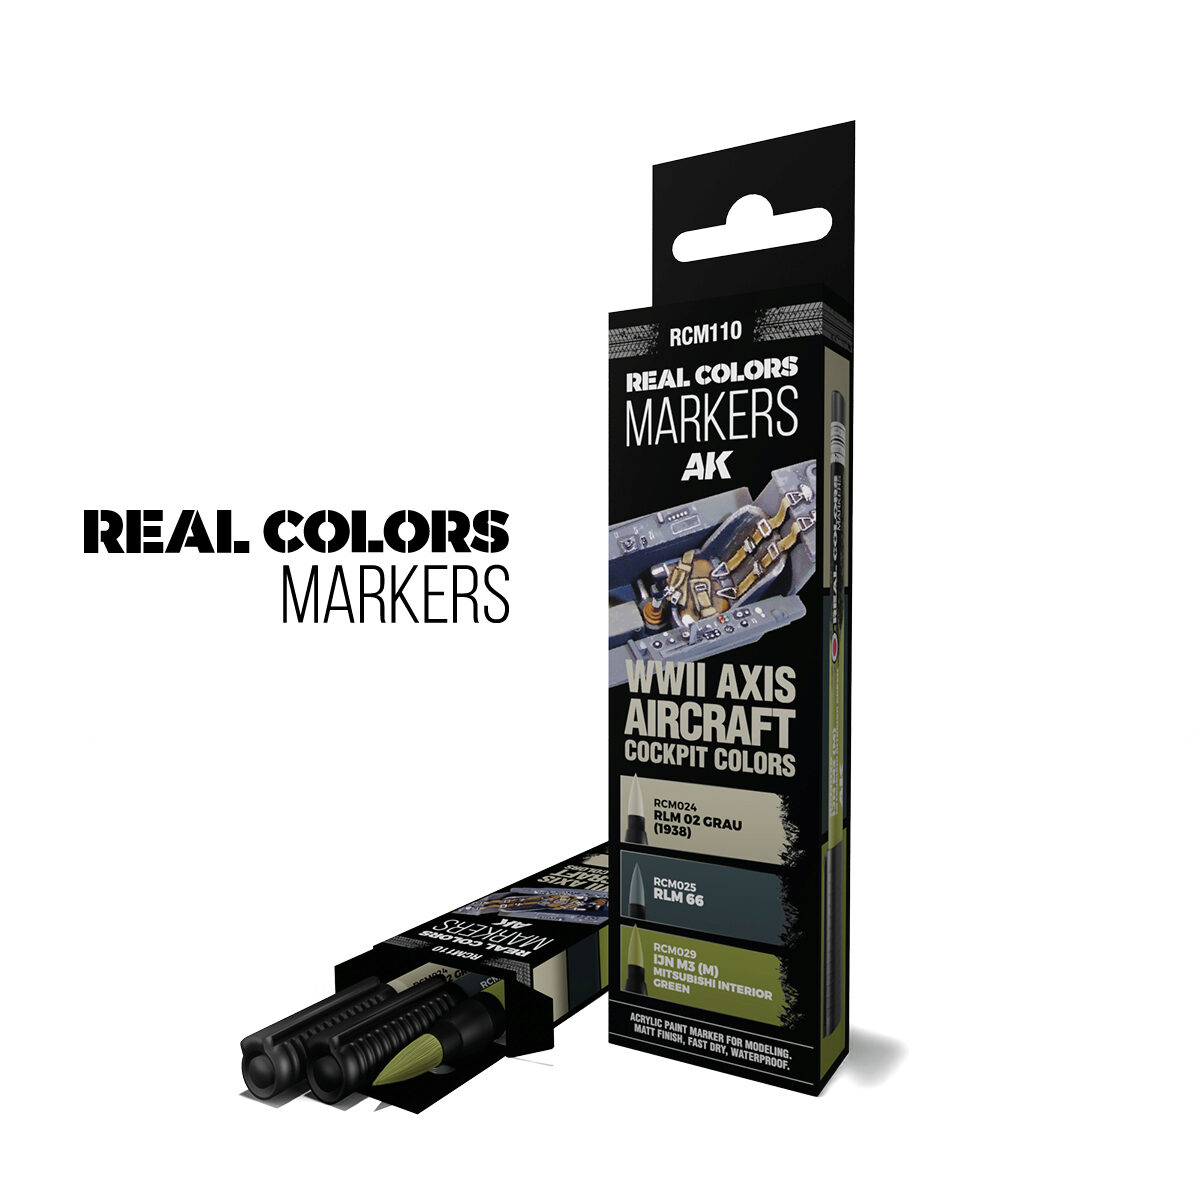 AK RCM110 WWII AXIS AIRCRAFT COCKPIT COLORS - SET 3 REAL COLORS MARKERS